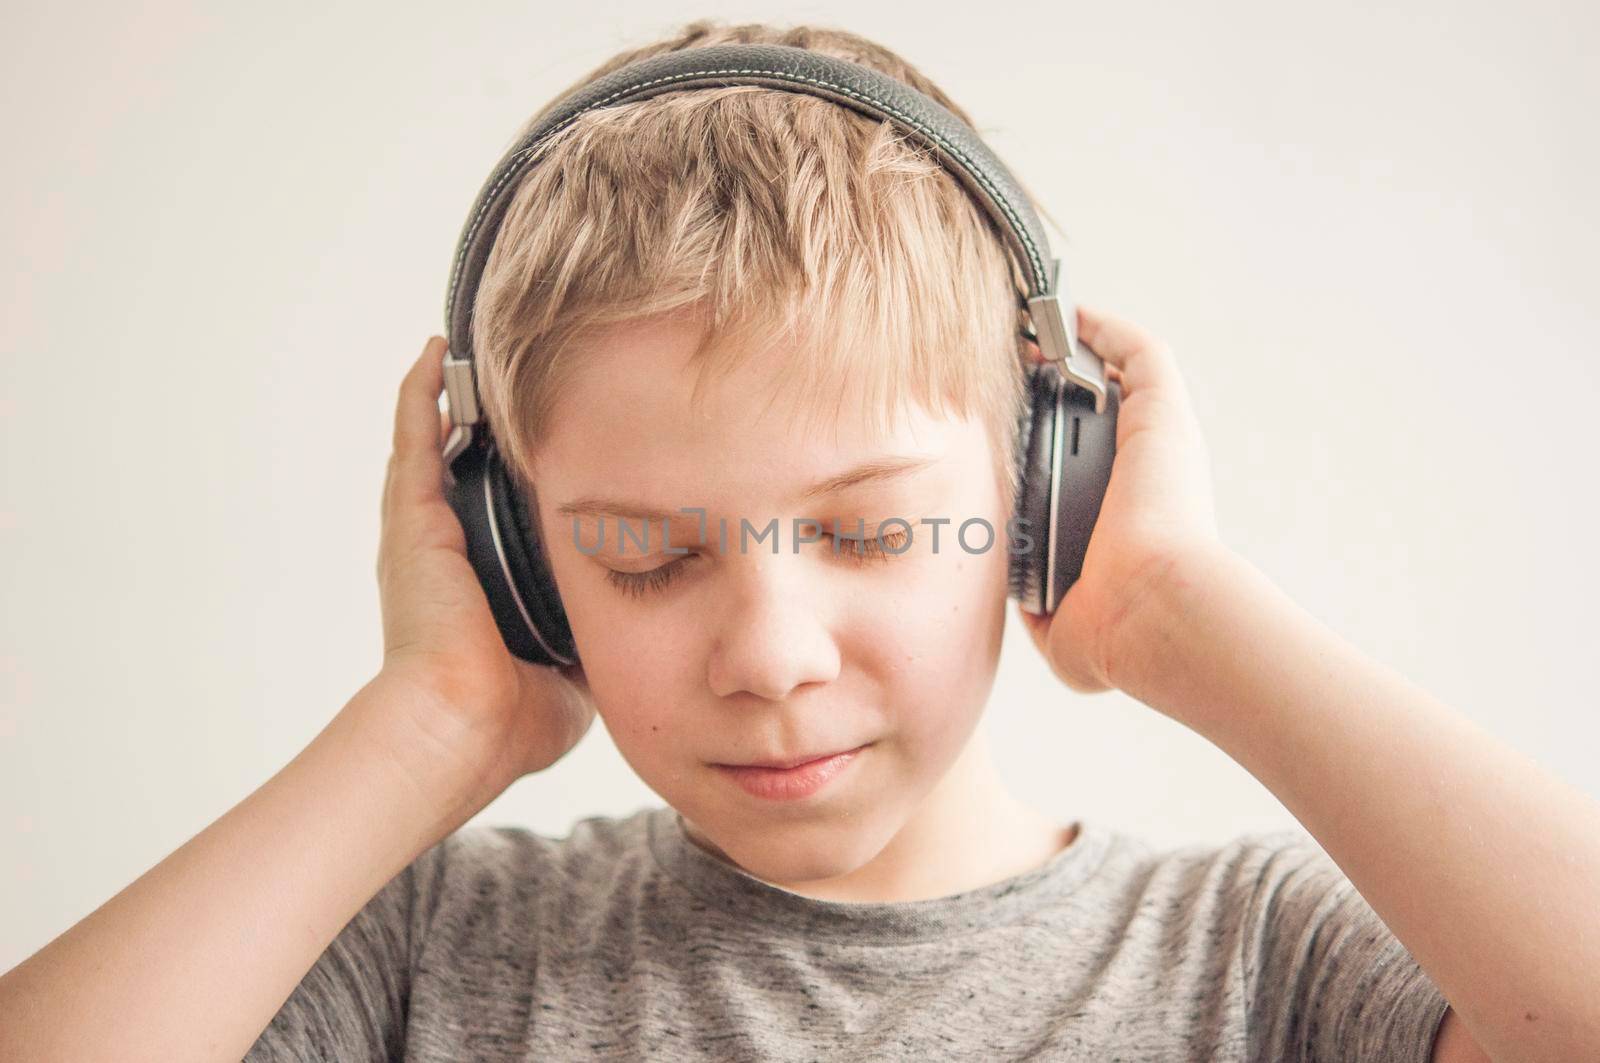 Stylish teen boy listening music in headphones and singing against white background. School child listening loud music in wireless earphones